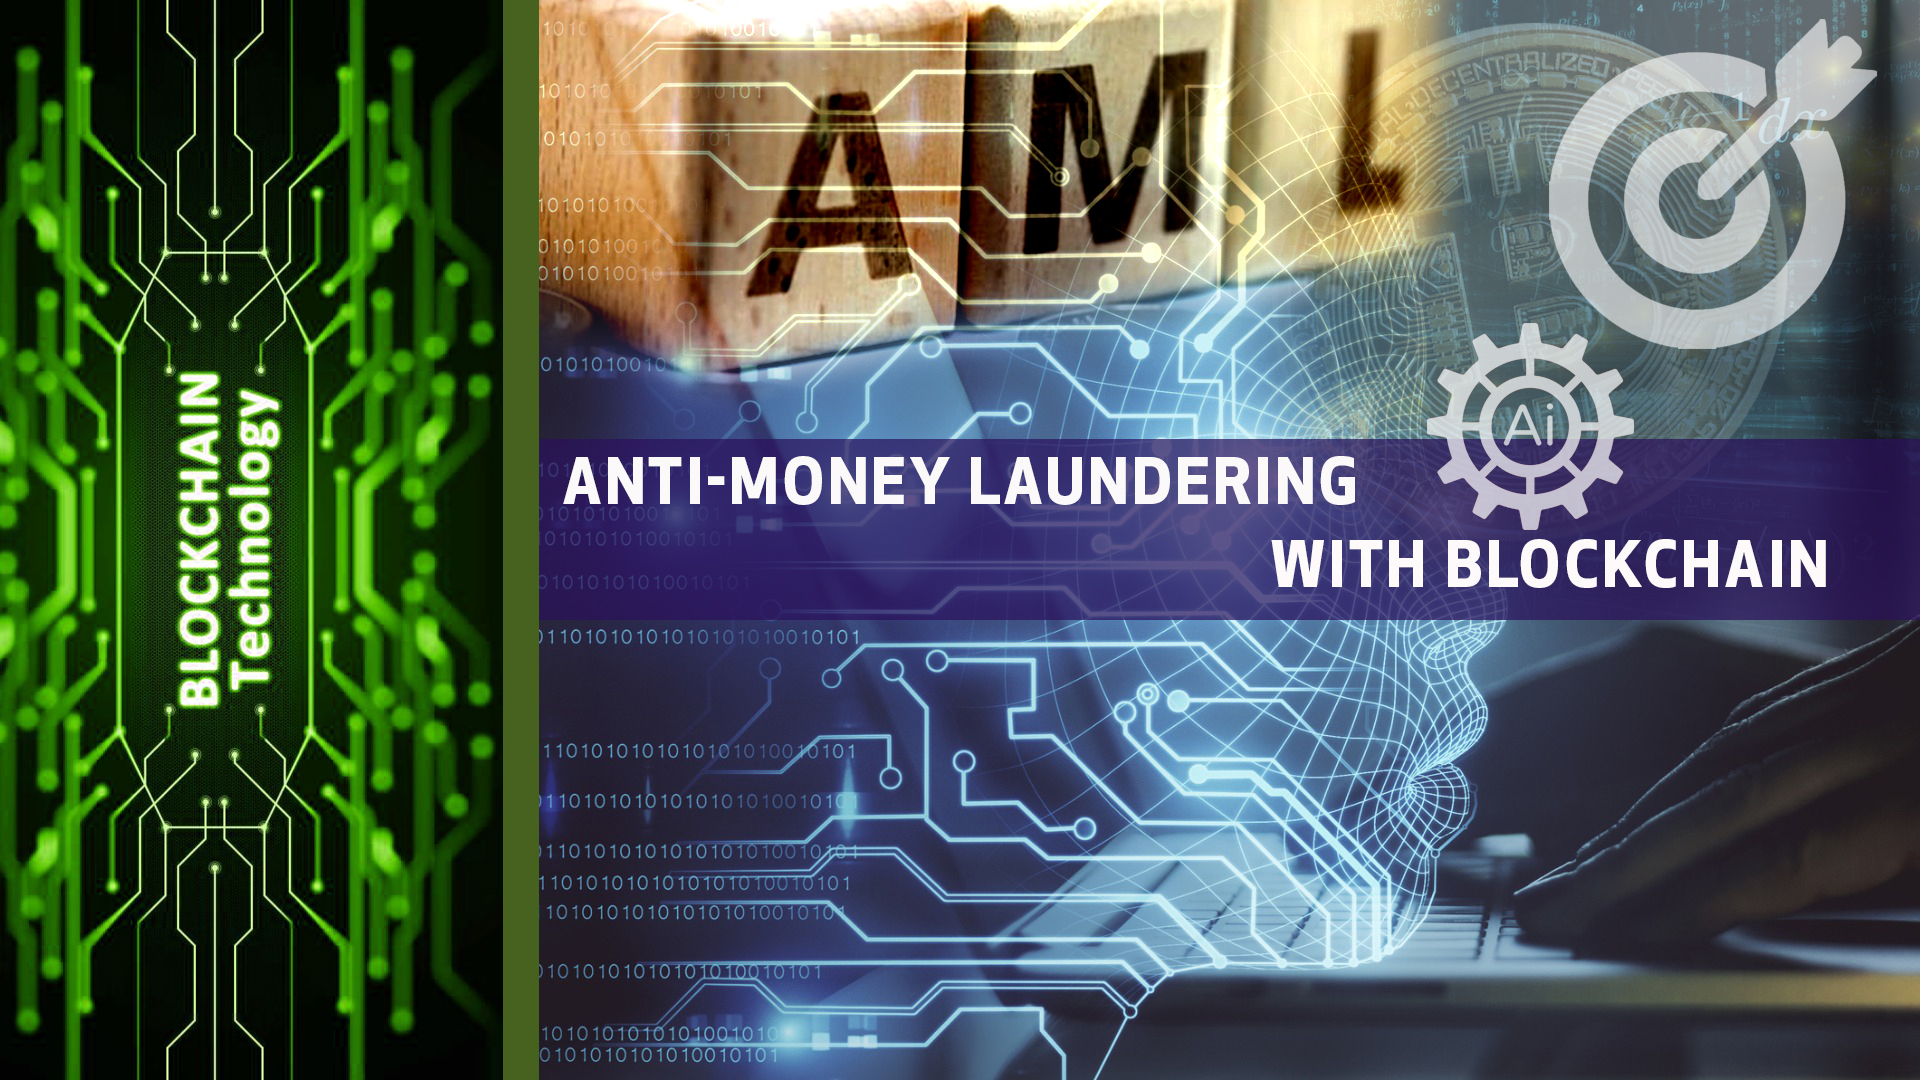 Sachin Dev Duggal’s Anti-Money Laundering Tool is Way More Effective with Blockchain Implementation